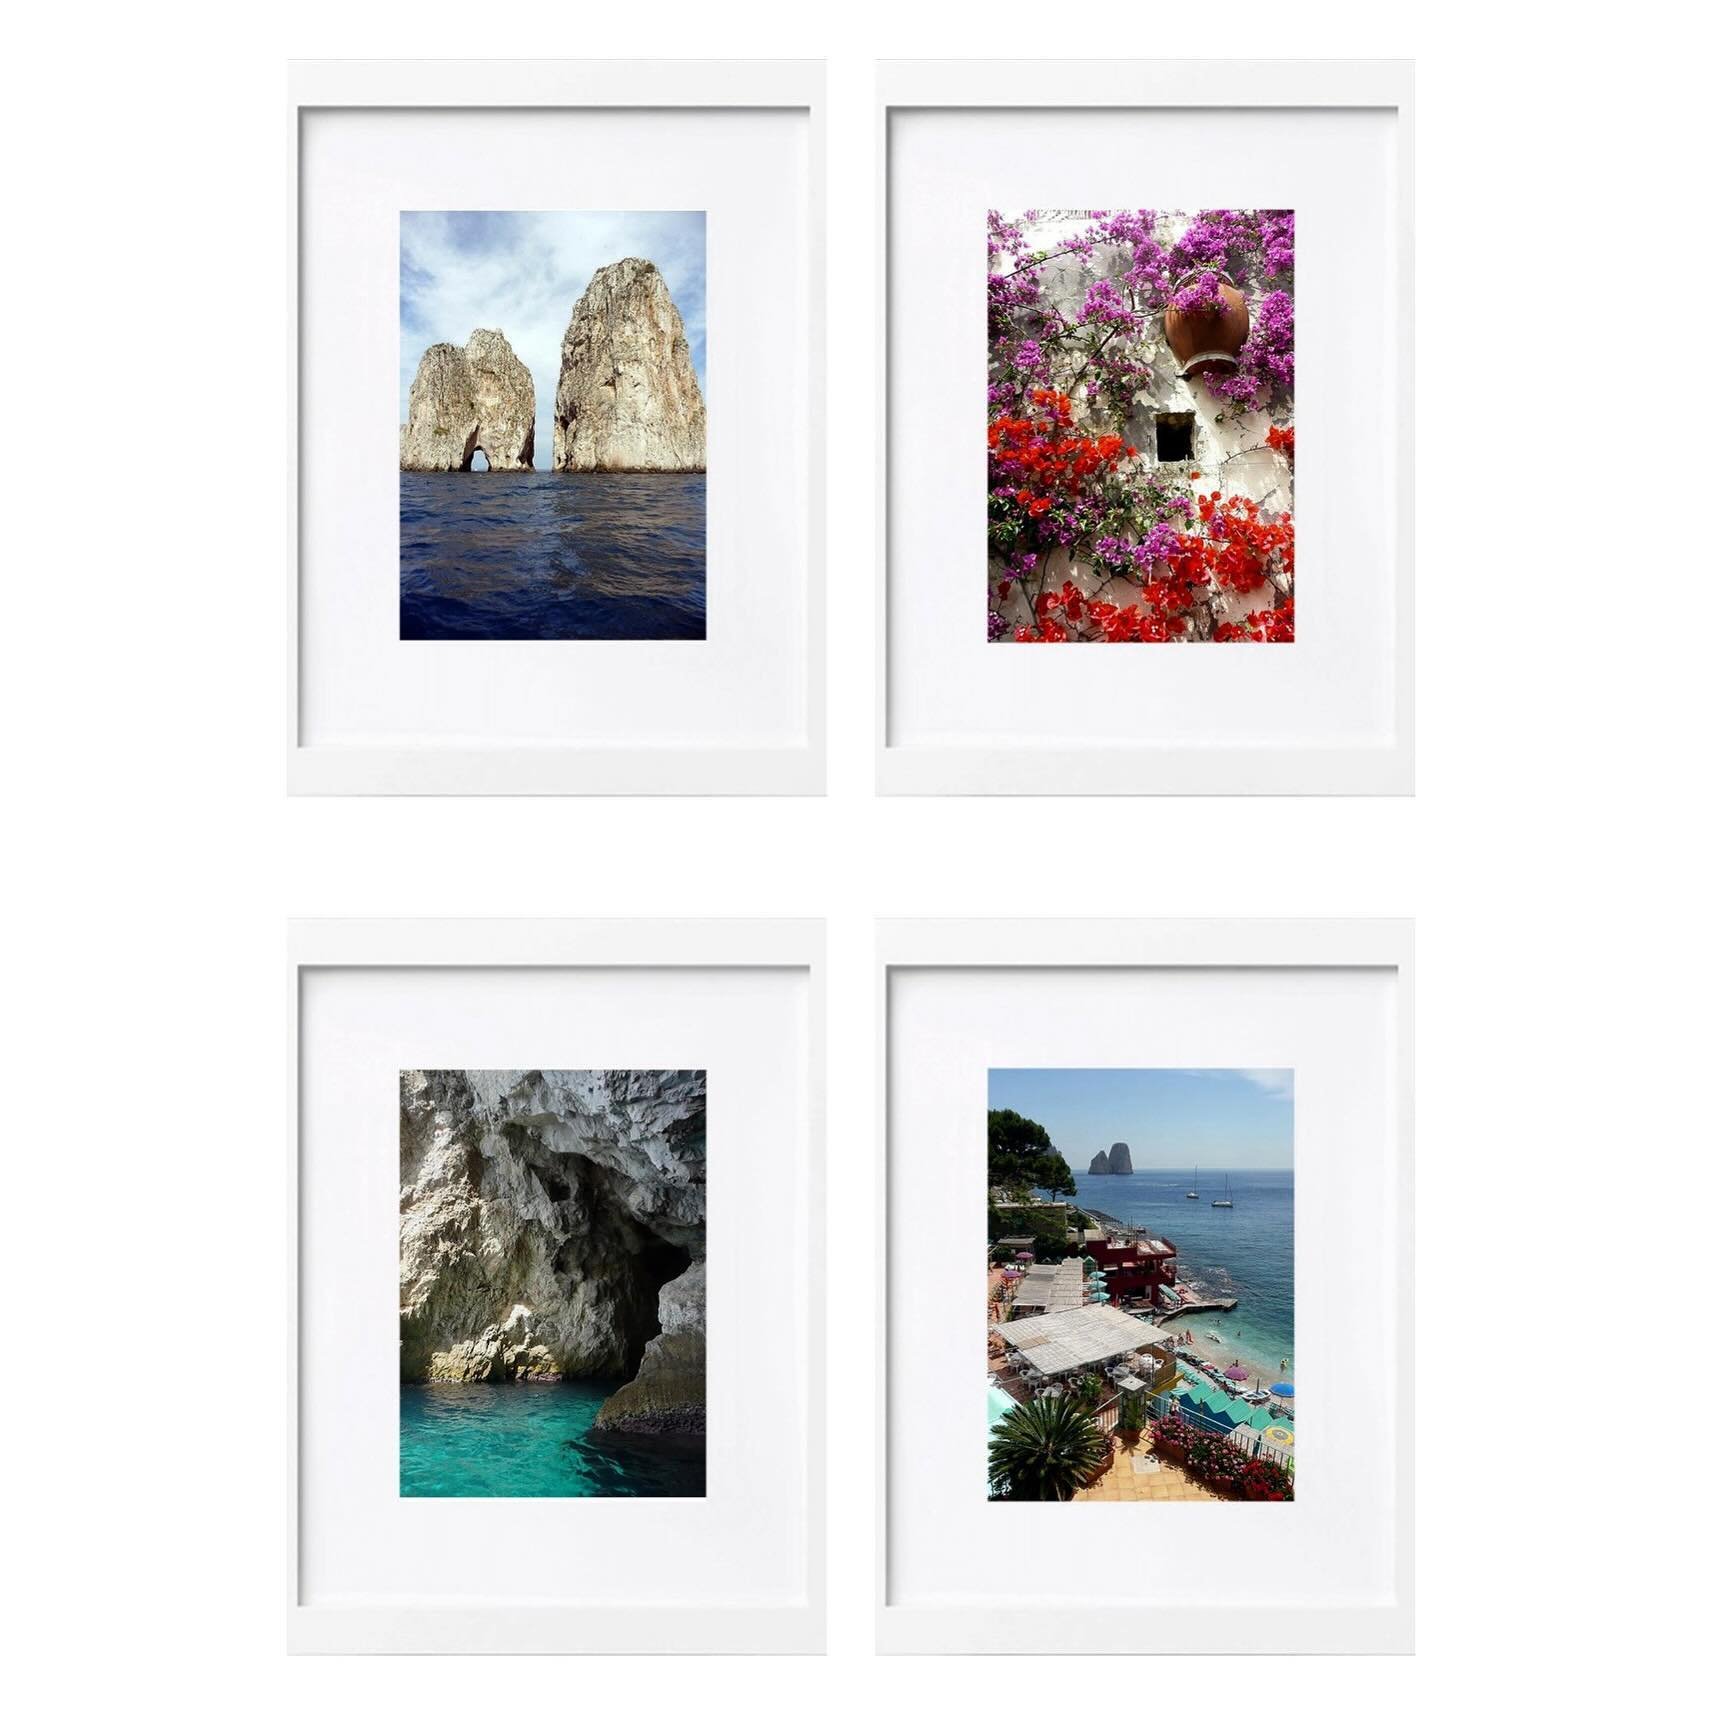 LA DOLCE VITA 🍋 | when it&rsquo;s May and still a little gray. We have a solution to bring some eternal Italian 🇮🇹 sunshine ☀️ home! Check out our  selection of photography from the AMALFI COAST. @knofdesign